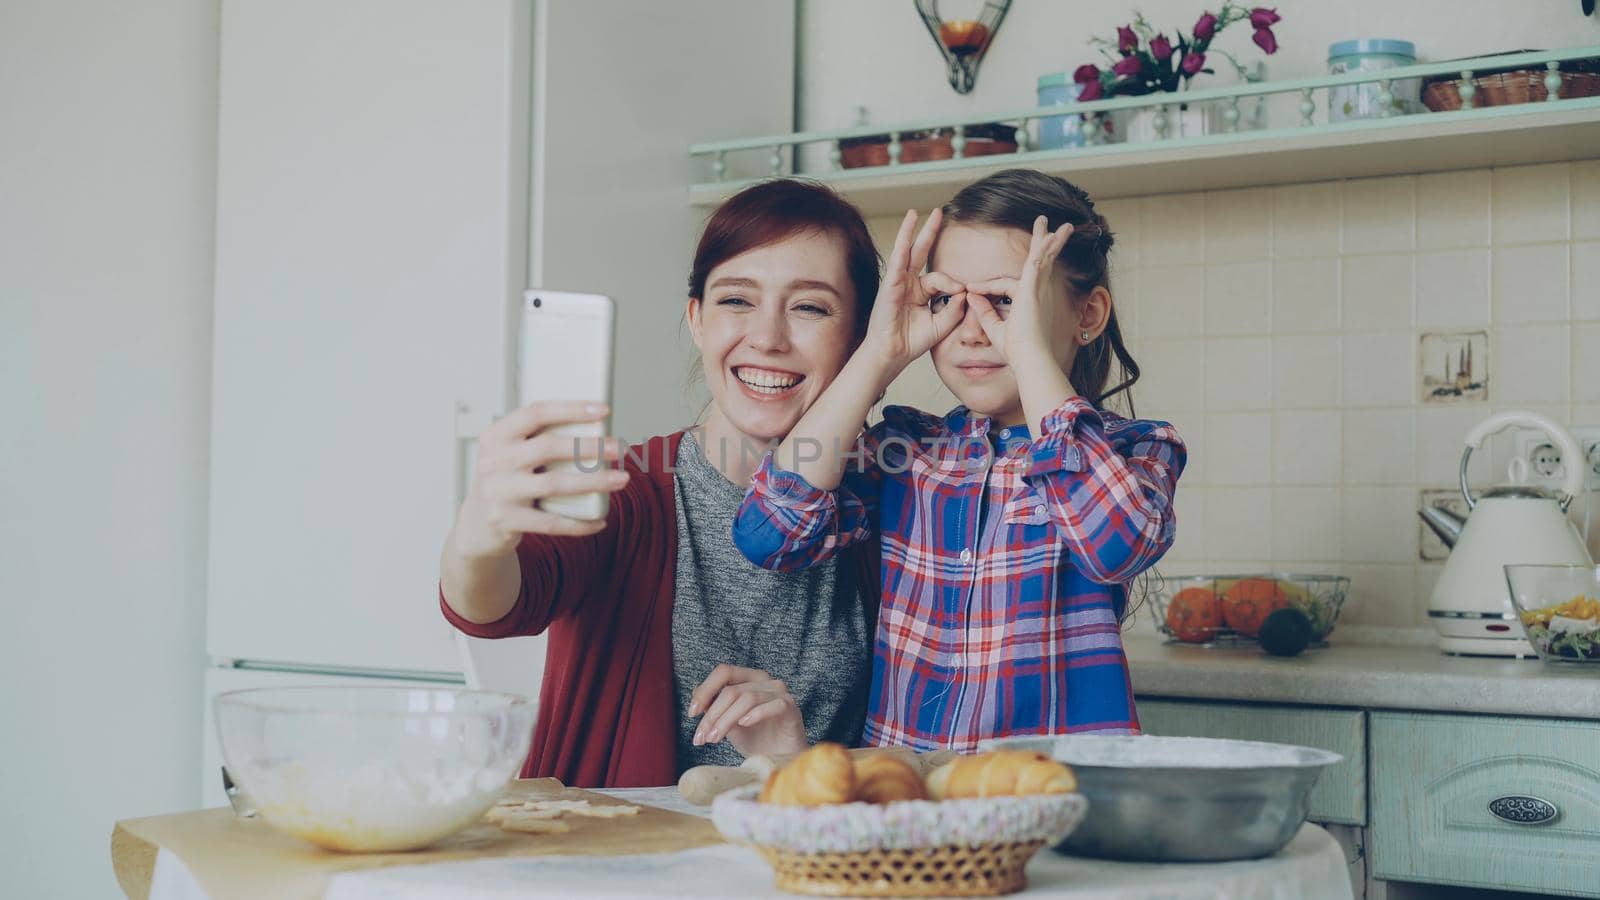 Smiling mother together with funny cute daughter taking selfie photo with smartphone camera making silly face while cooking at home in kitchen. Family, cook, and people concept